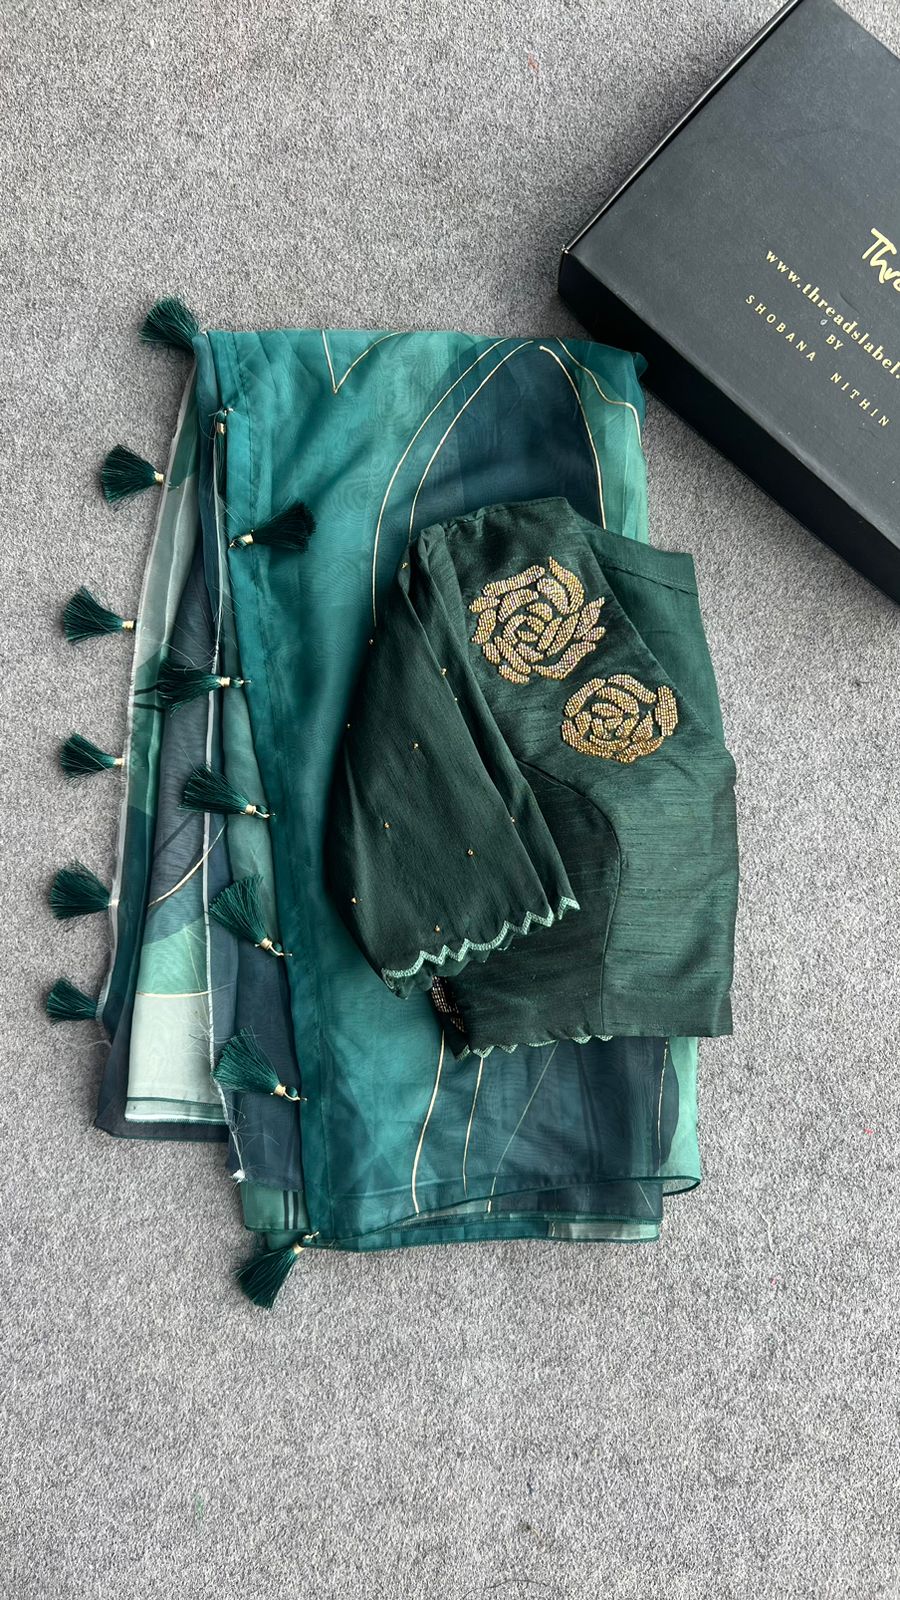 Trouser Design With Pearls Trouser Design With Plates Trouser Design With  Lace Trouser Design Wit | Women trousers design, Salwar pattern, Pants  women fashion